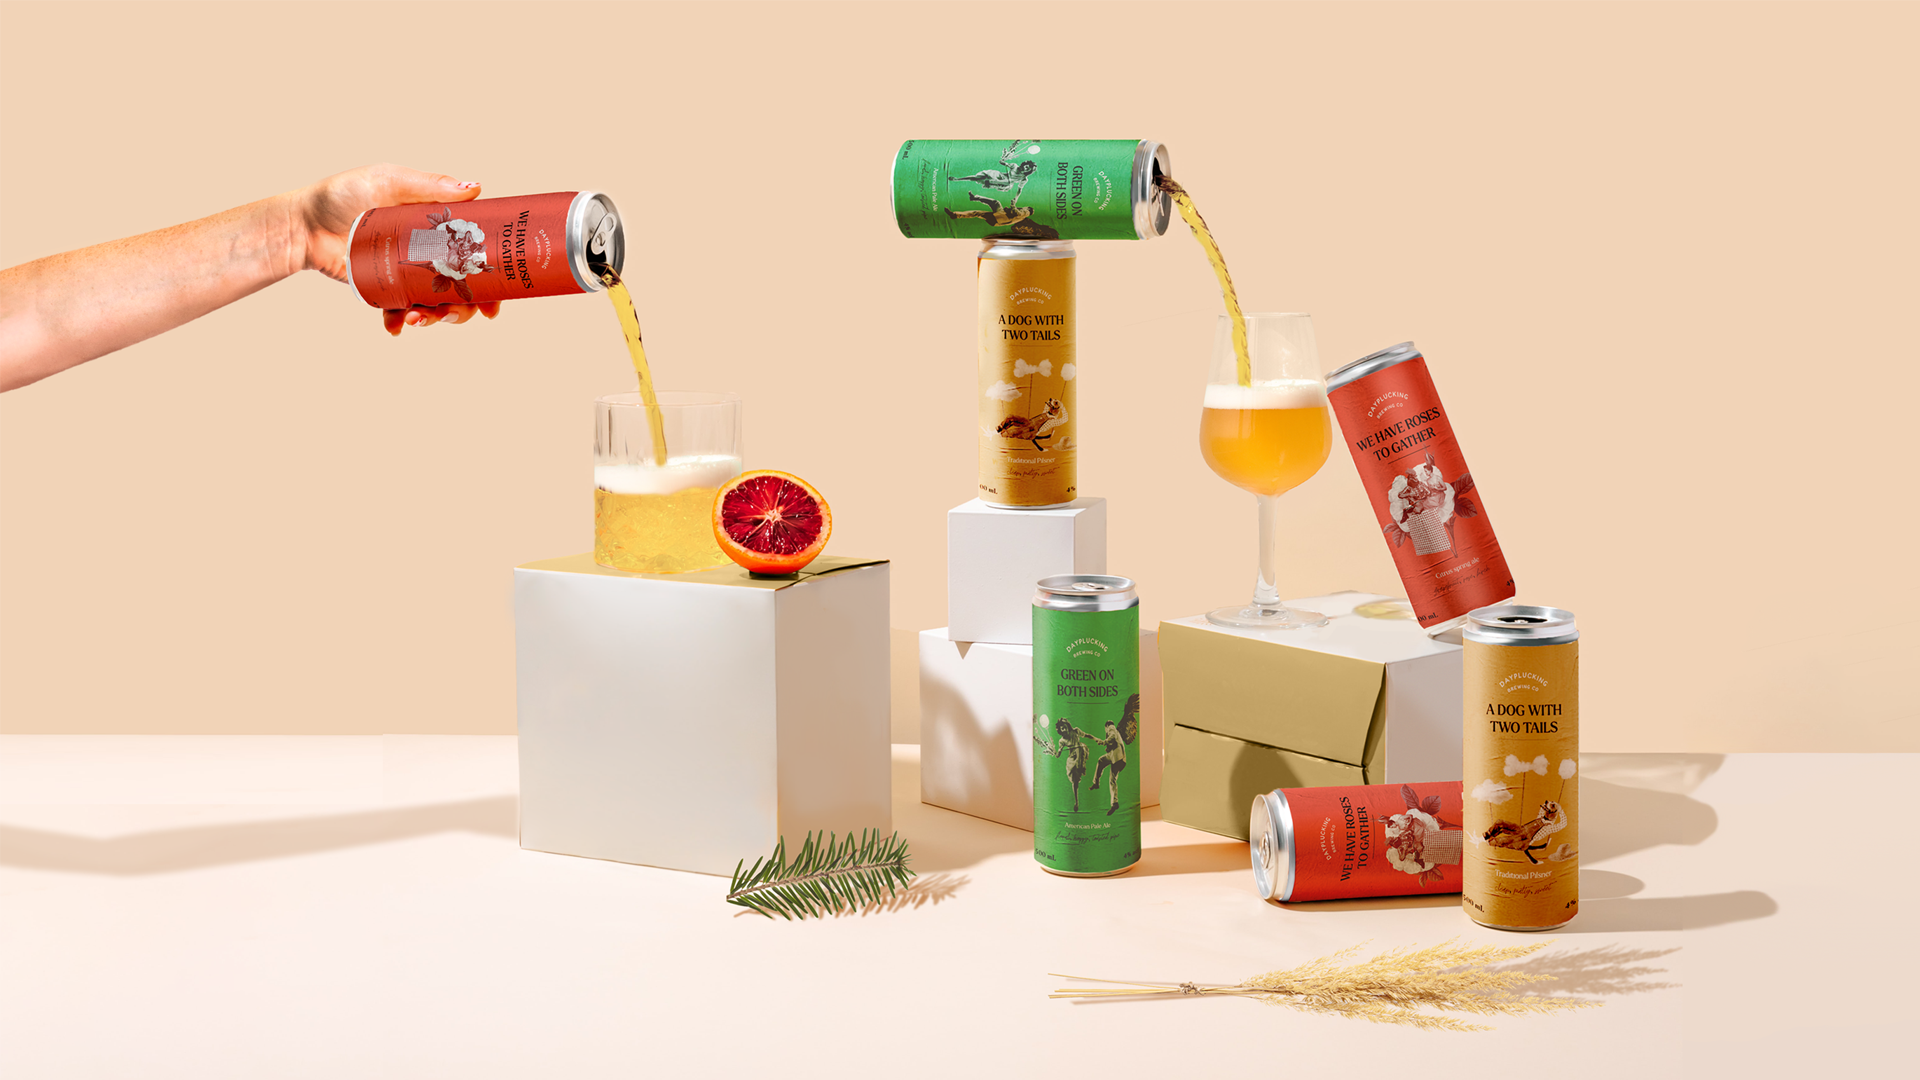 An image of 3 different beers on a set of white boxes staggering in height. The background of the set is beige, while the cans alternate between red, green, and brown, each with different assigned flavors. A hand pours beer into a glass on the left side of the image. A blood orange, a pine sprig, and a wheat bundle are scattered around the set next to their matching cans.